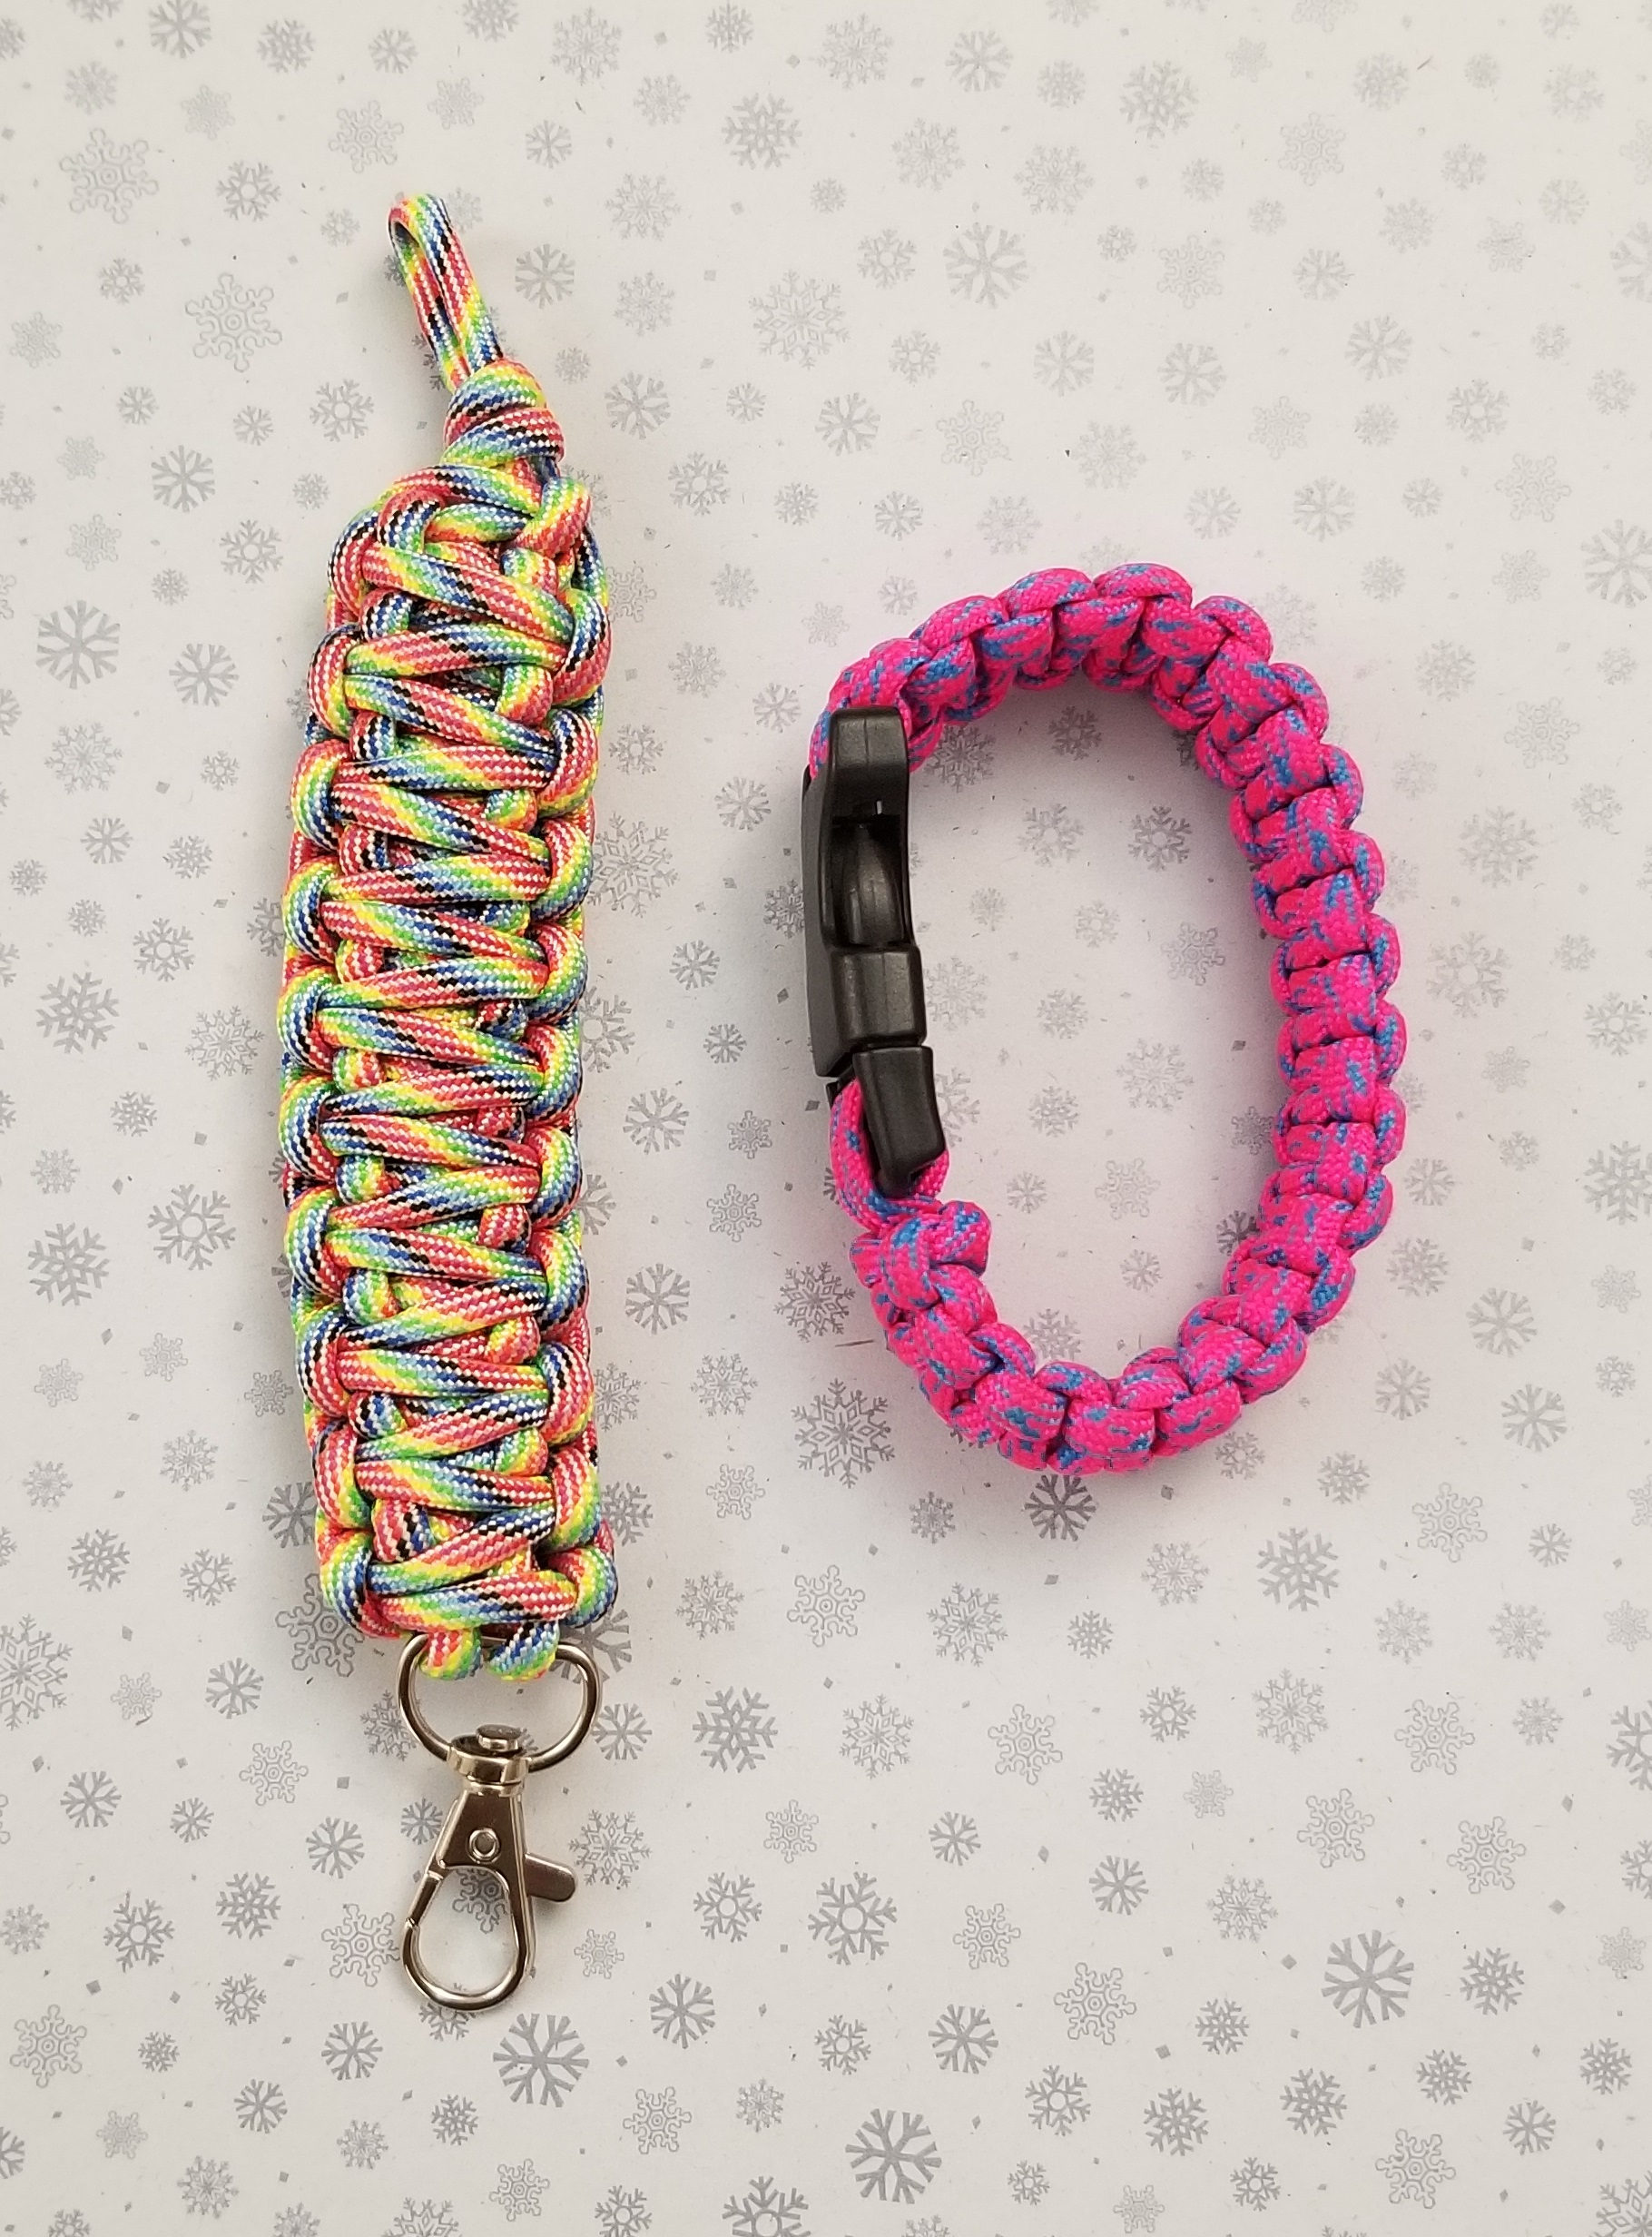 Two example paracord creations: a rainbow lanyard and pink and blue bracelet.